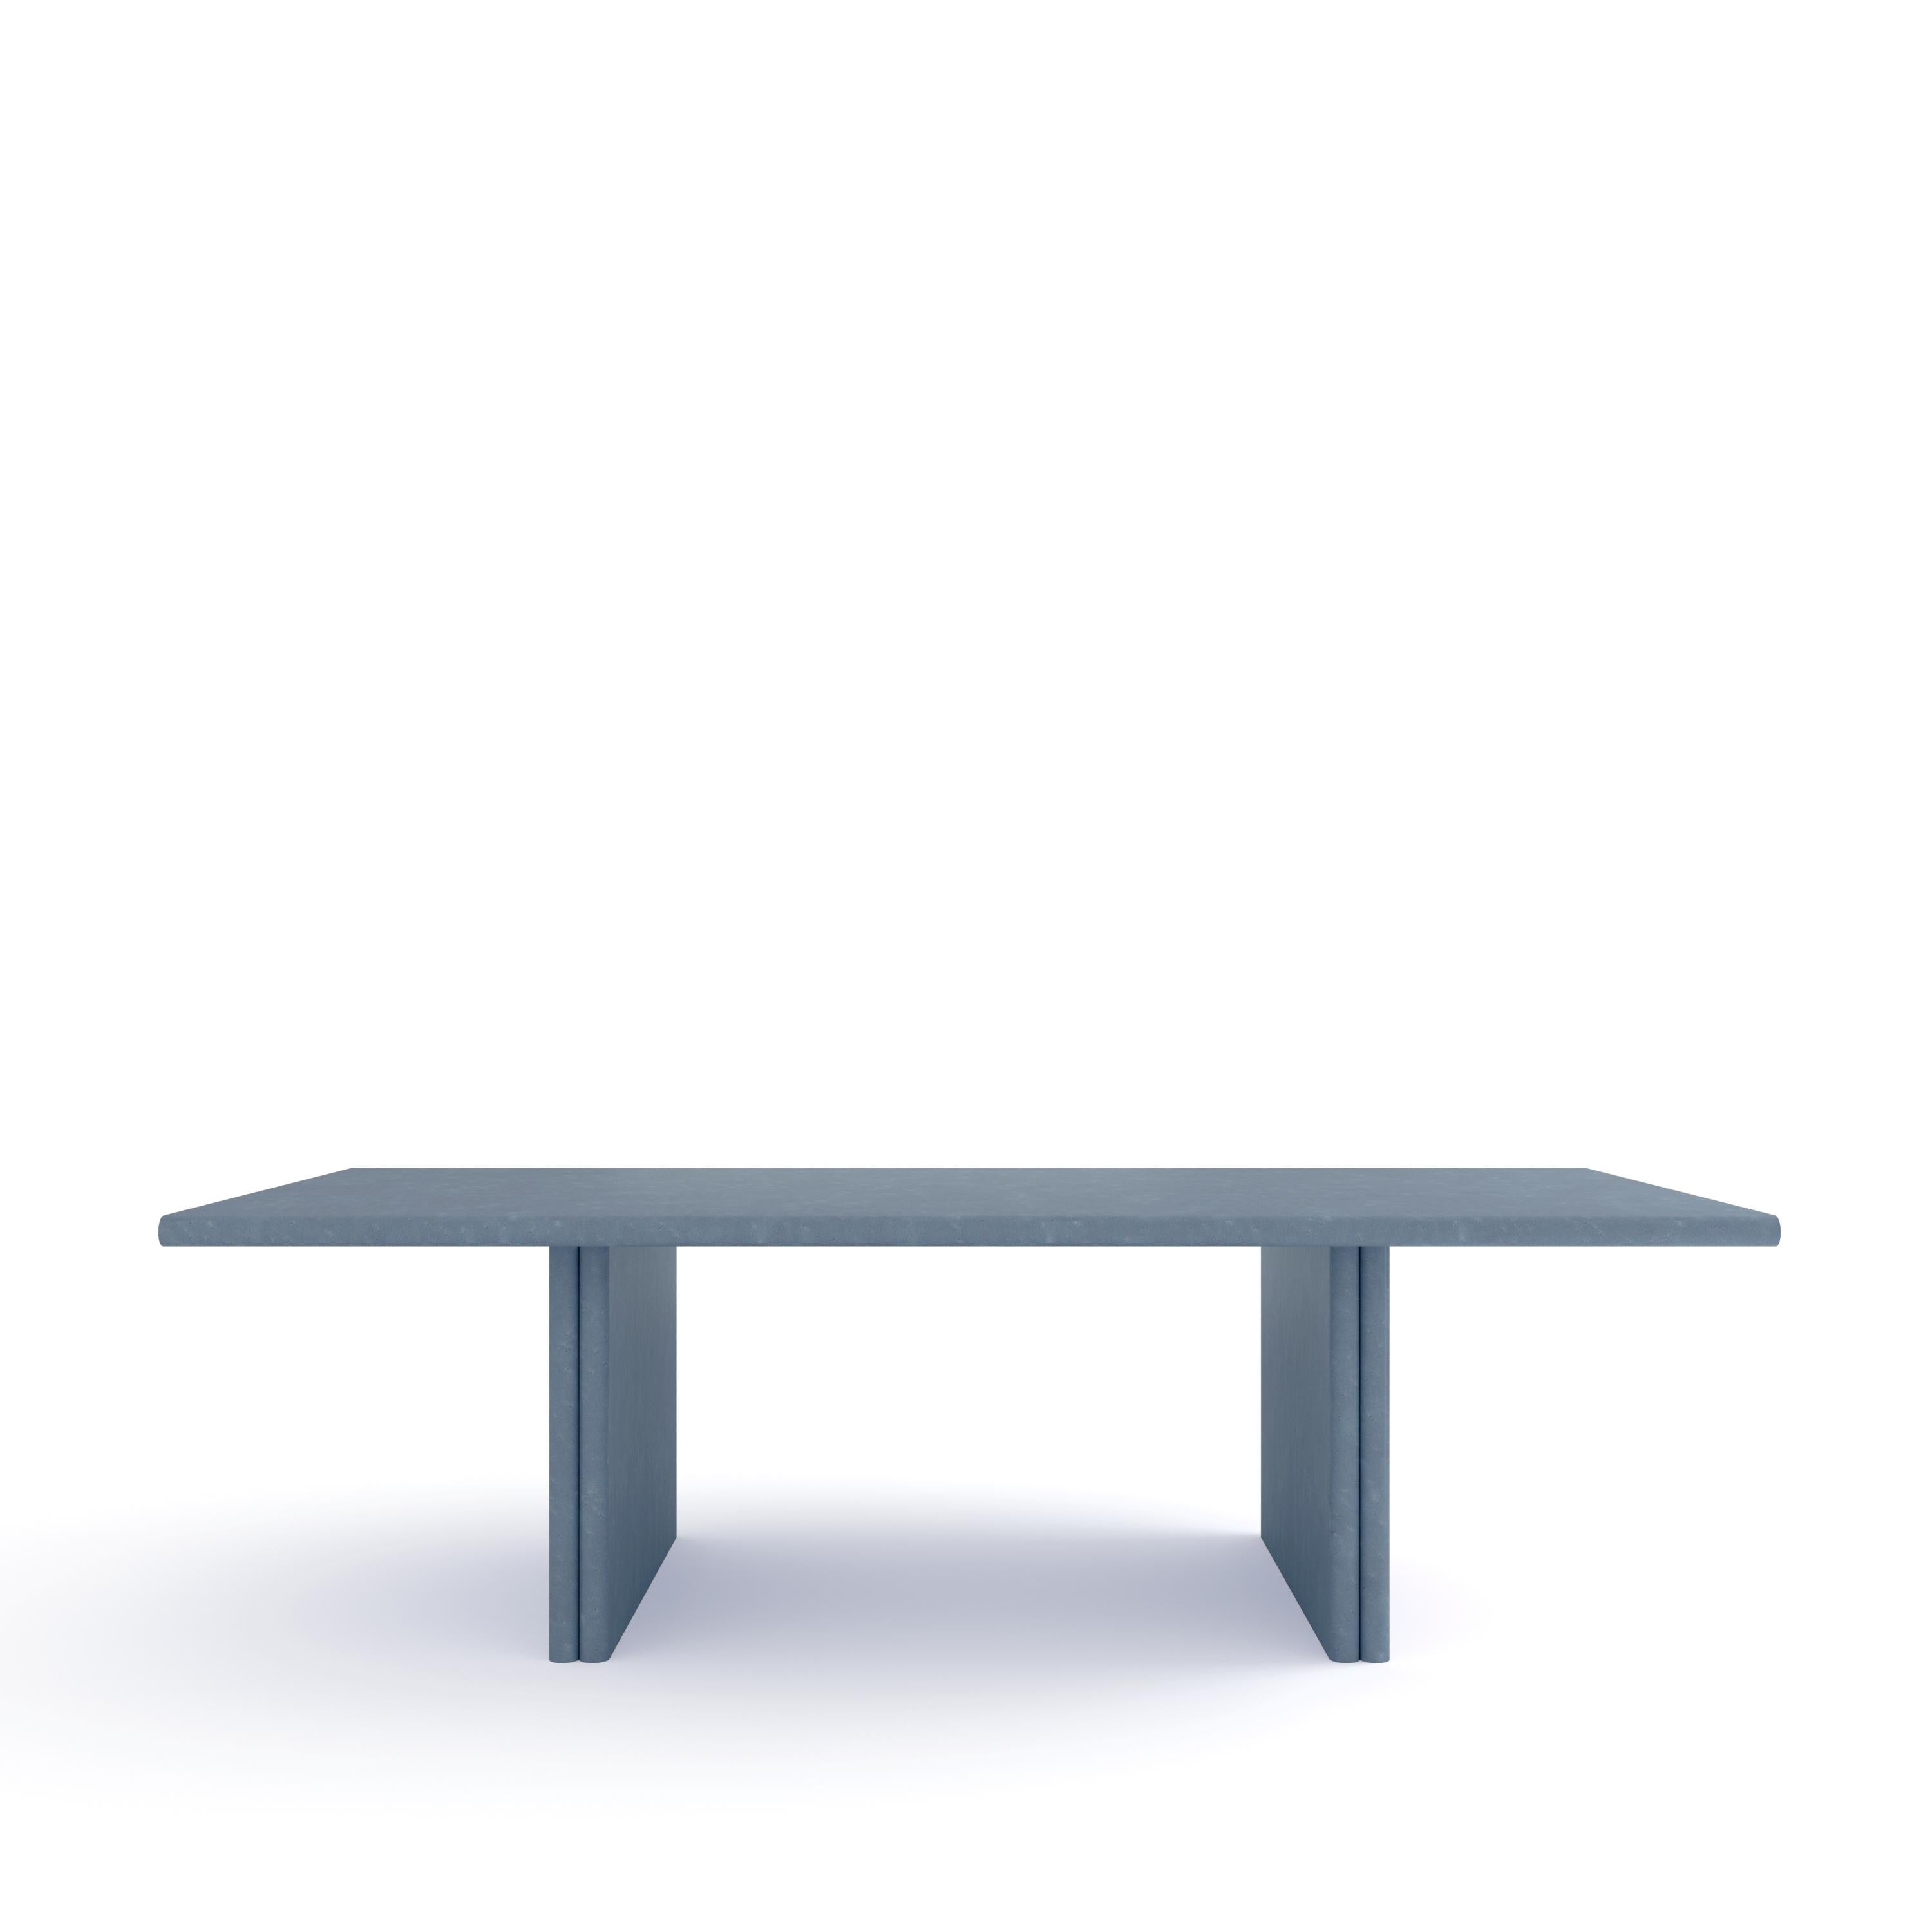 Jacques Rectangular Powder Blue Dining Table by Fred and Juul
Dimensions: D 120 x W 260 x H 74 cm.
Materials: Birdseye Maple veneer on MDF.

Available in different colors. Custom sizes, materials or finishes are available on request. Please contact